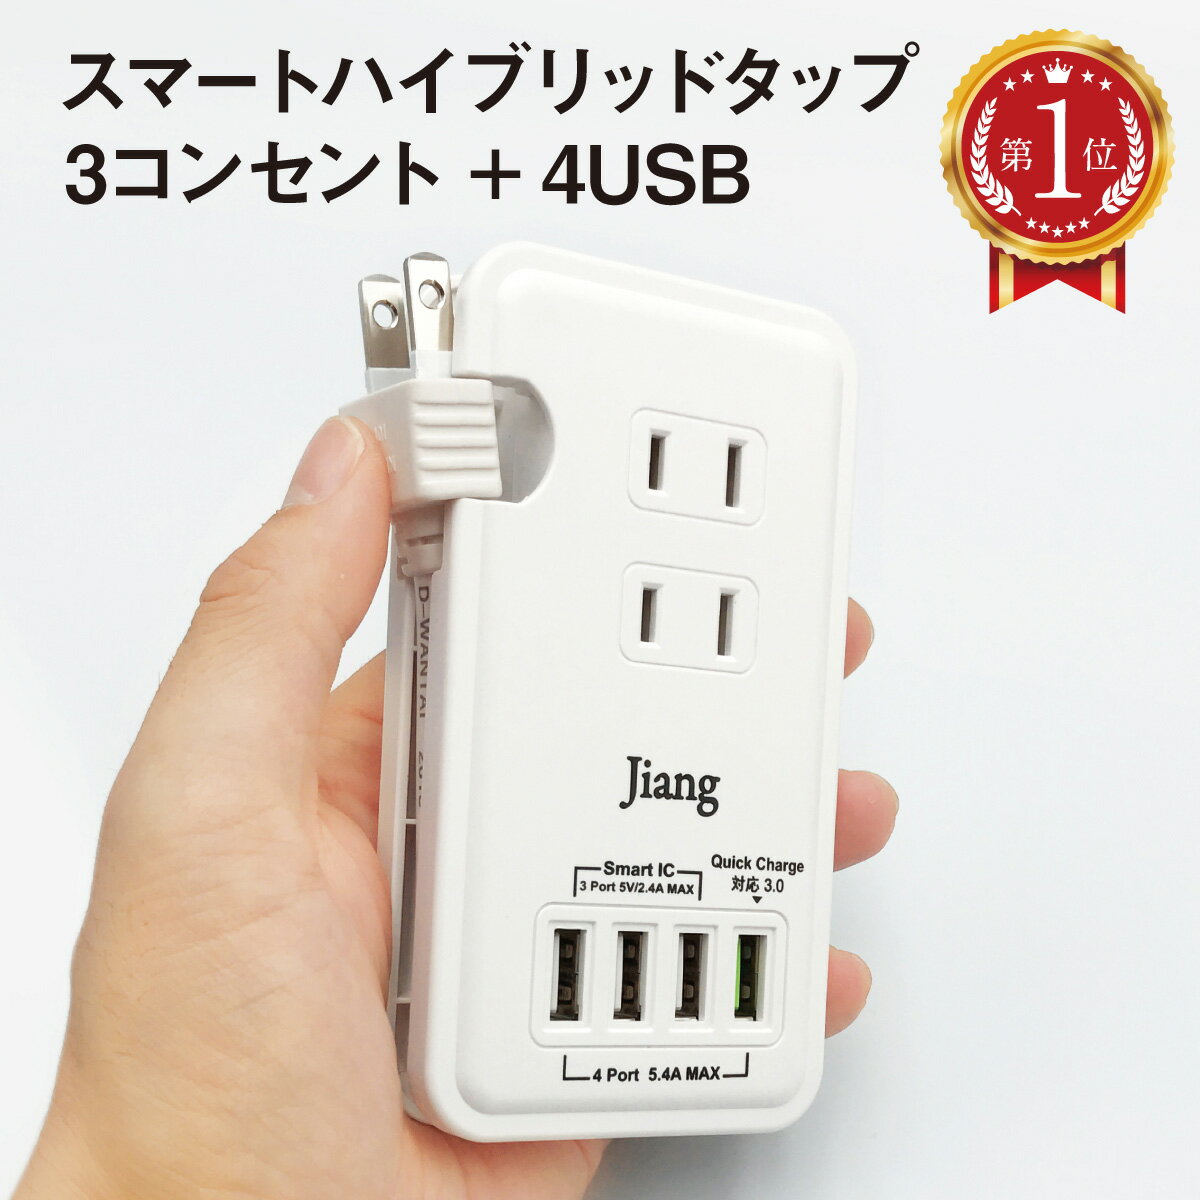 ACアダプター USB 急速 ACアダプタ スマートタップ コンセント タップ 4ポート usb 4口 5.4A 充電器 チャージャー USB充電器 コンセント 3口 1400W <strong>電源タップ</strong> 軽量 同時充電 アダプター USBタップ USBアダプタ スマホ充電器 Quick Charger 3.0A対応 jiang-tap01